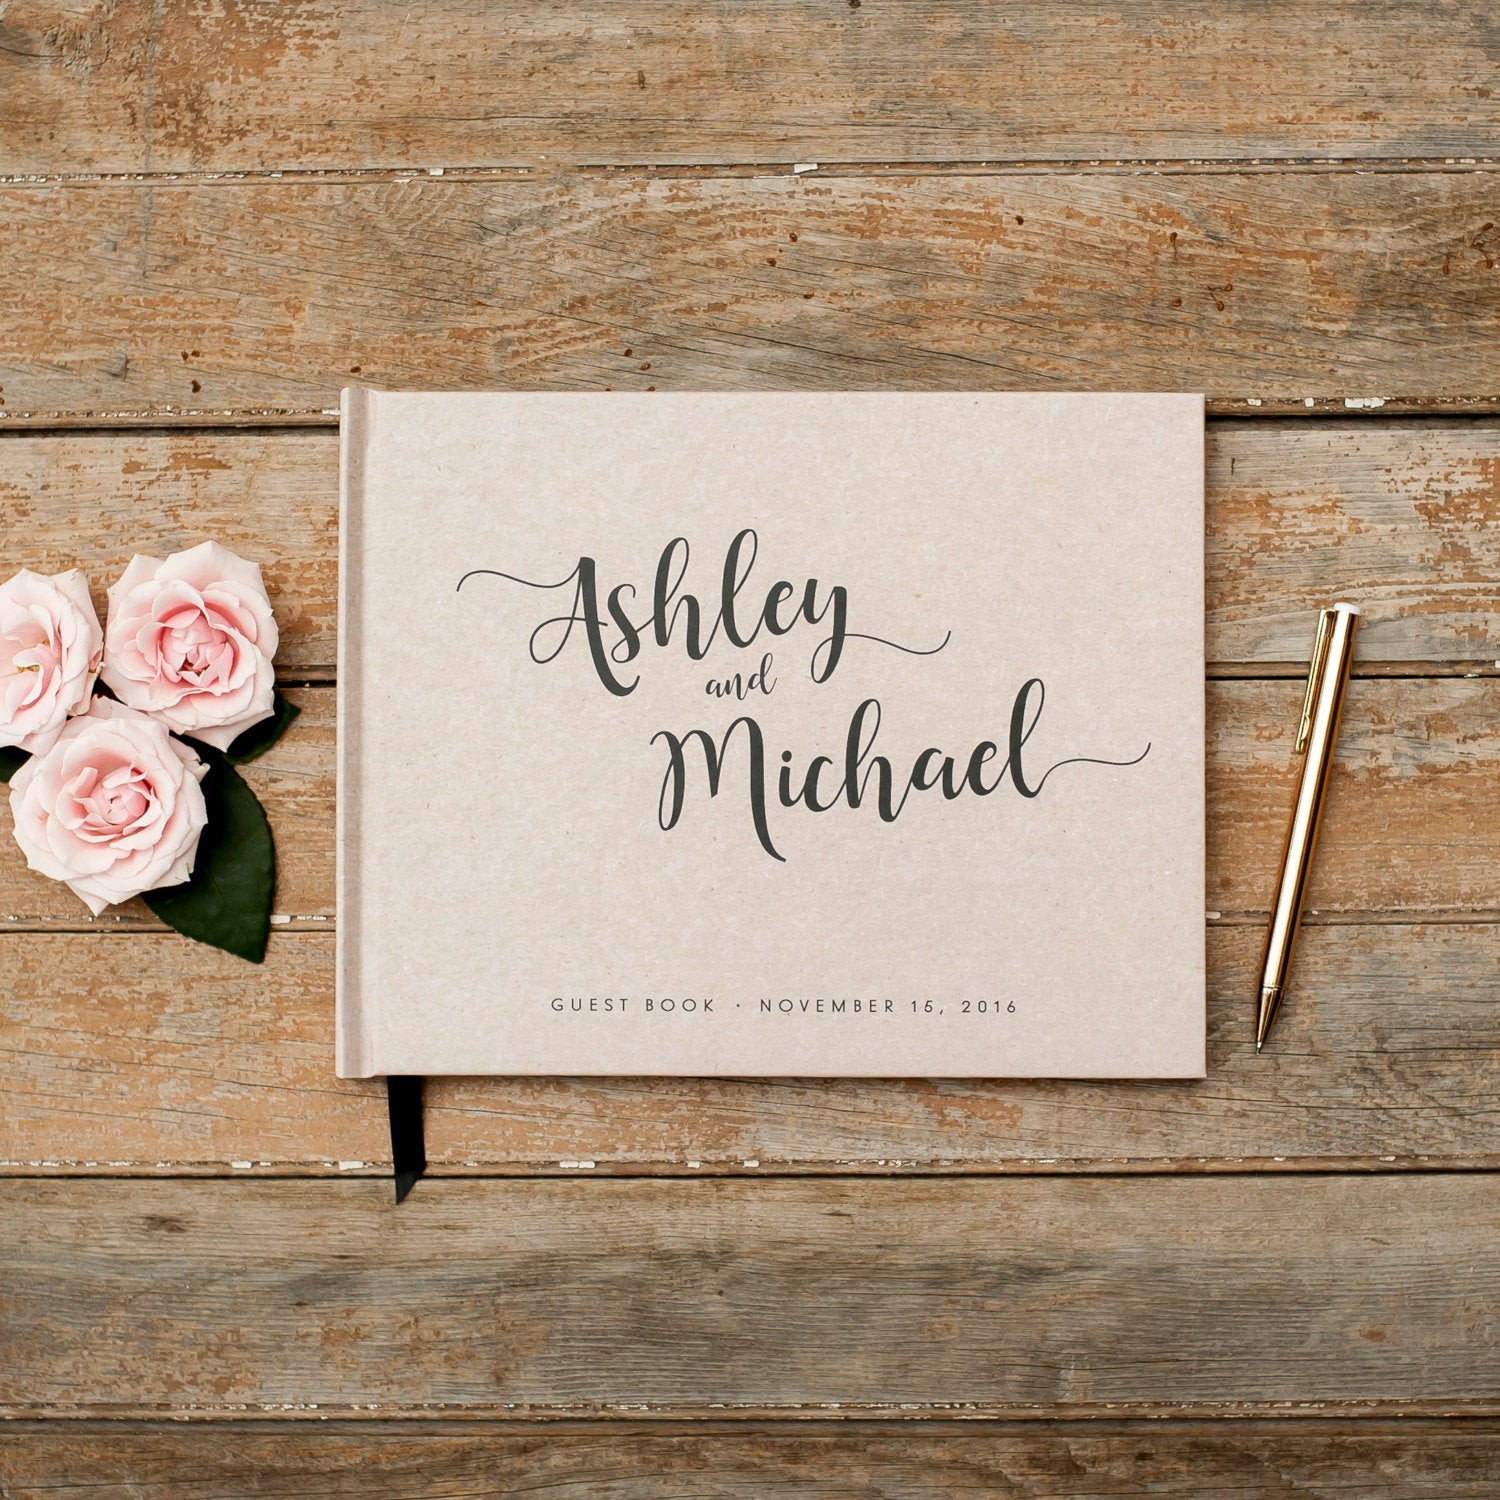 Wedding Guest Book Titles
 Wedding Guest Book horizontal landscape guestbook sign in book